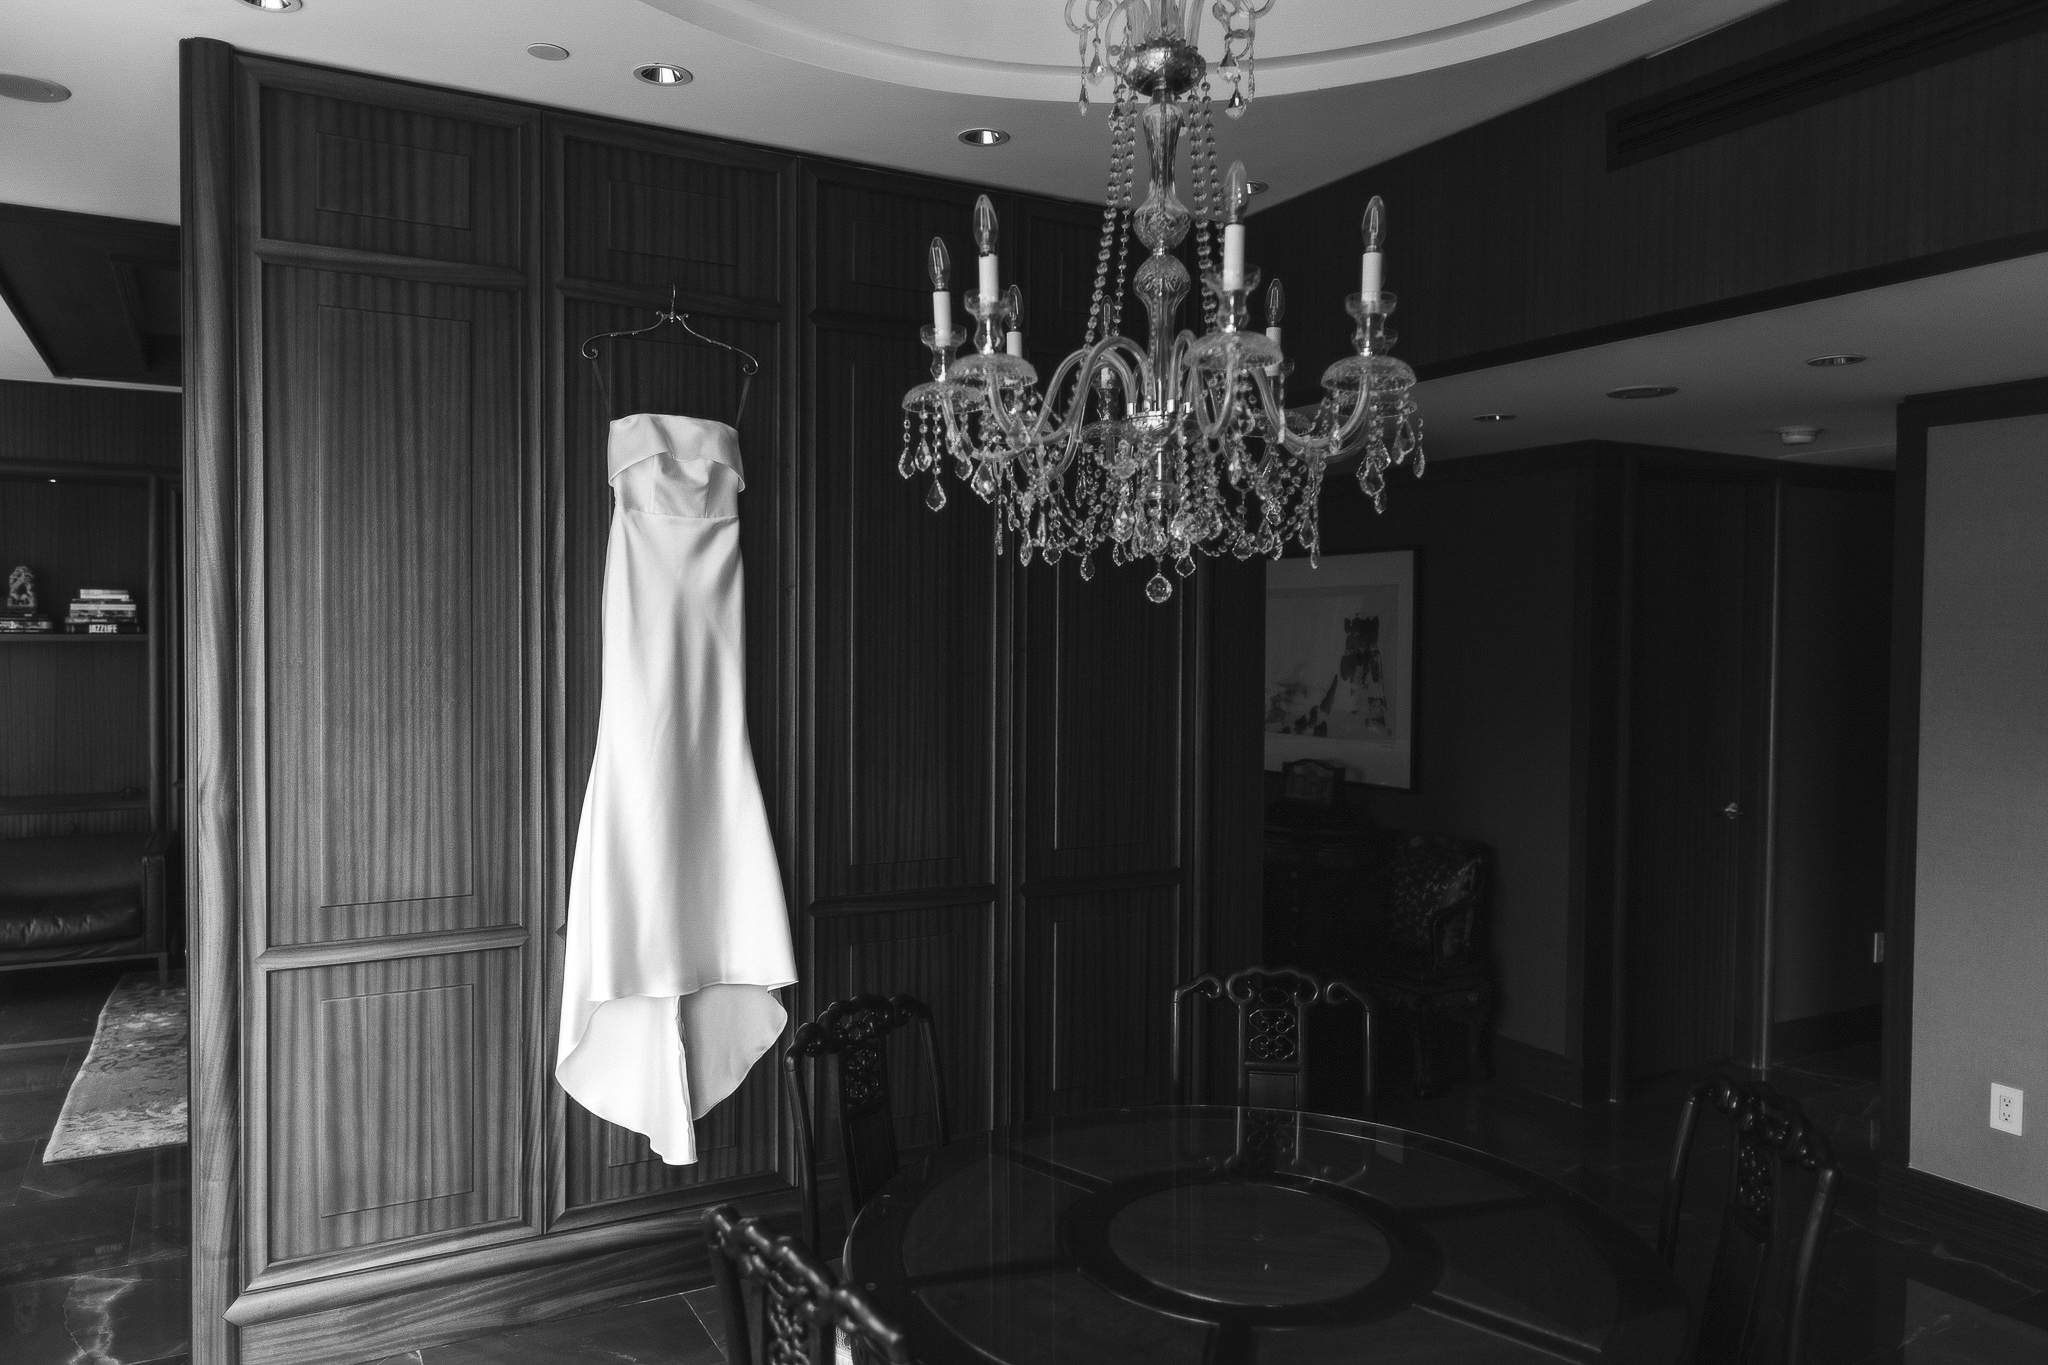 Wedding dress hanging on a wall, black and white.